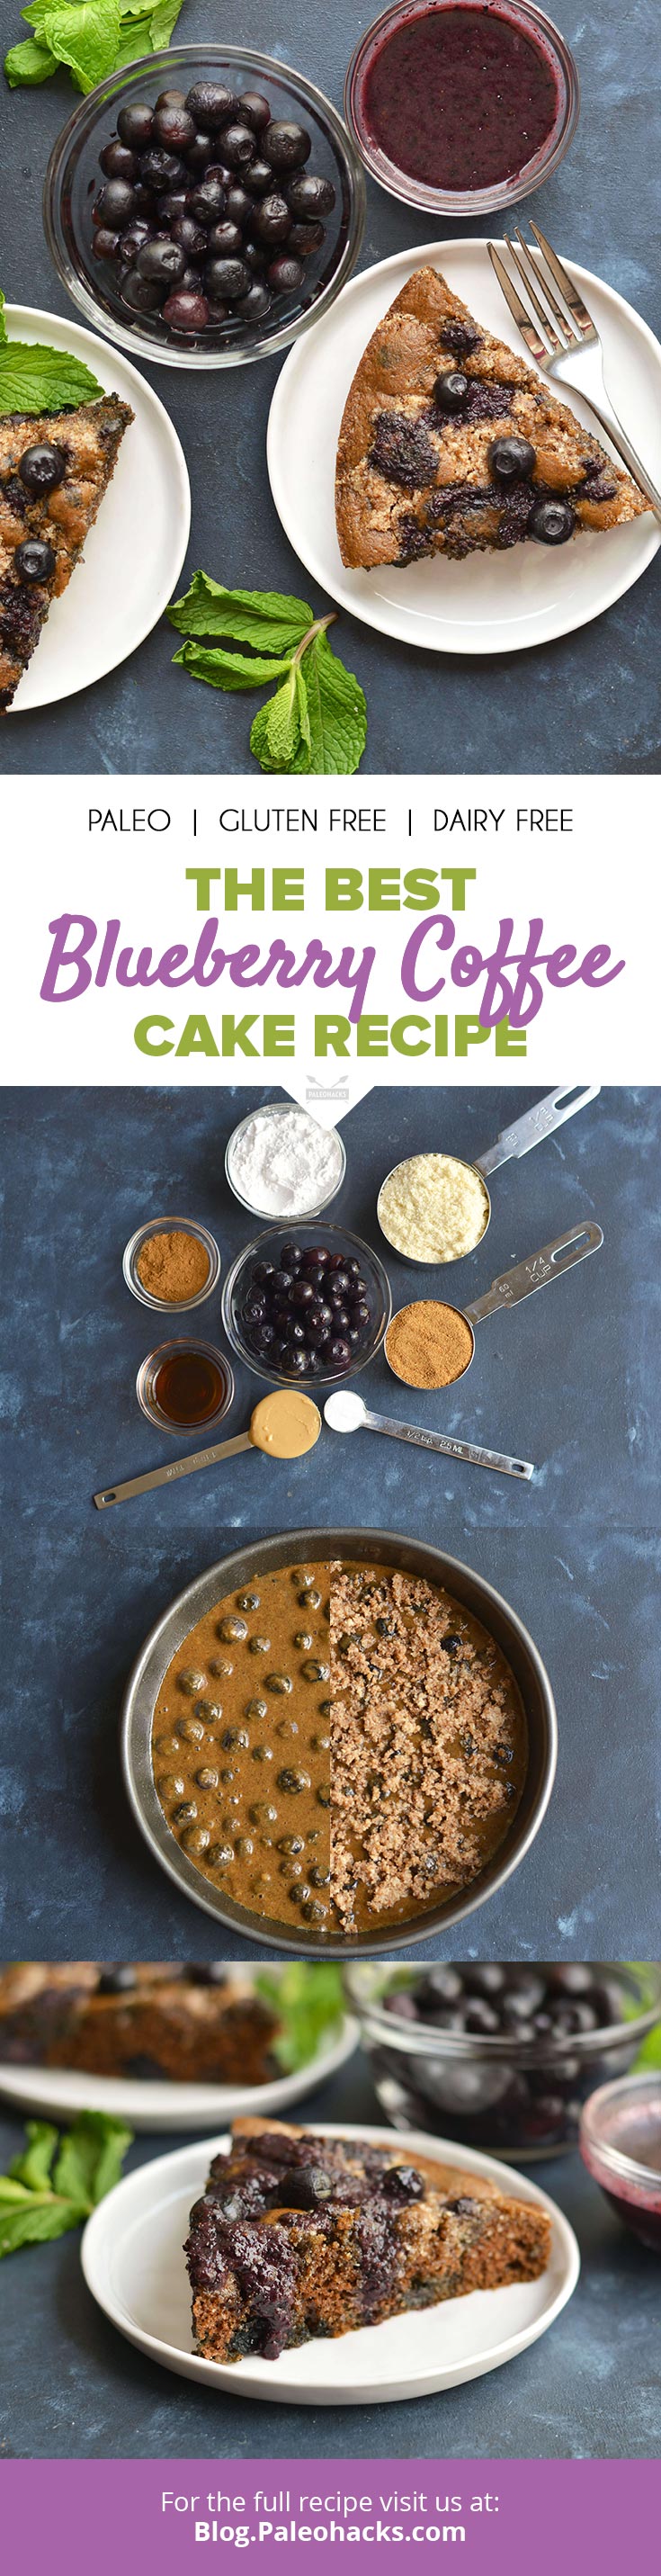 How to Make Blueberry Coffee Cake